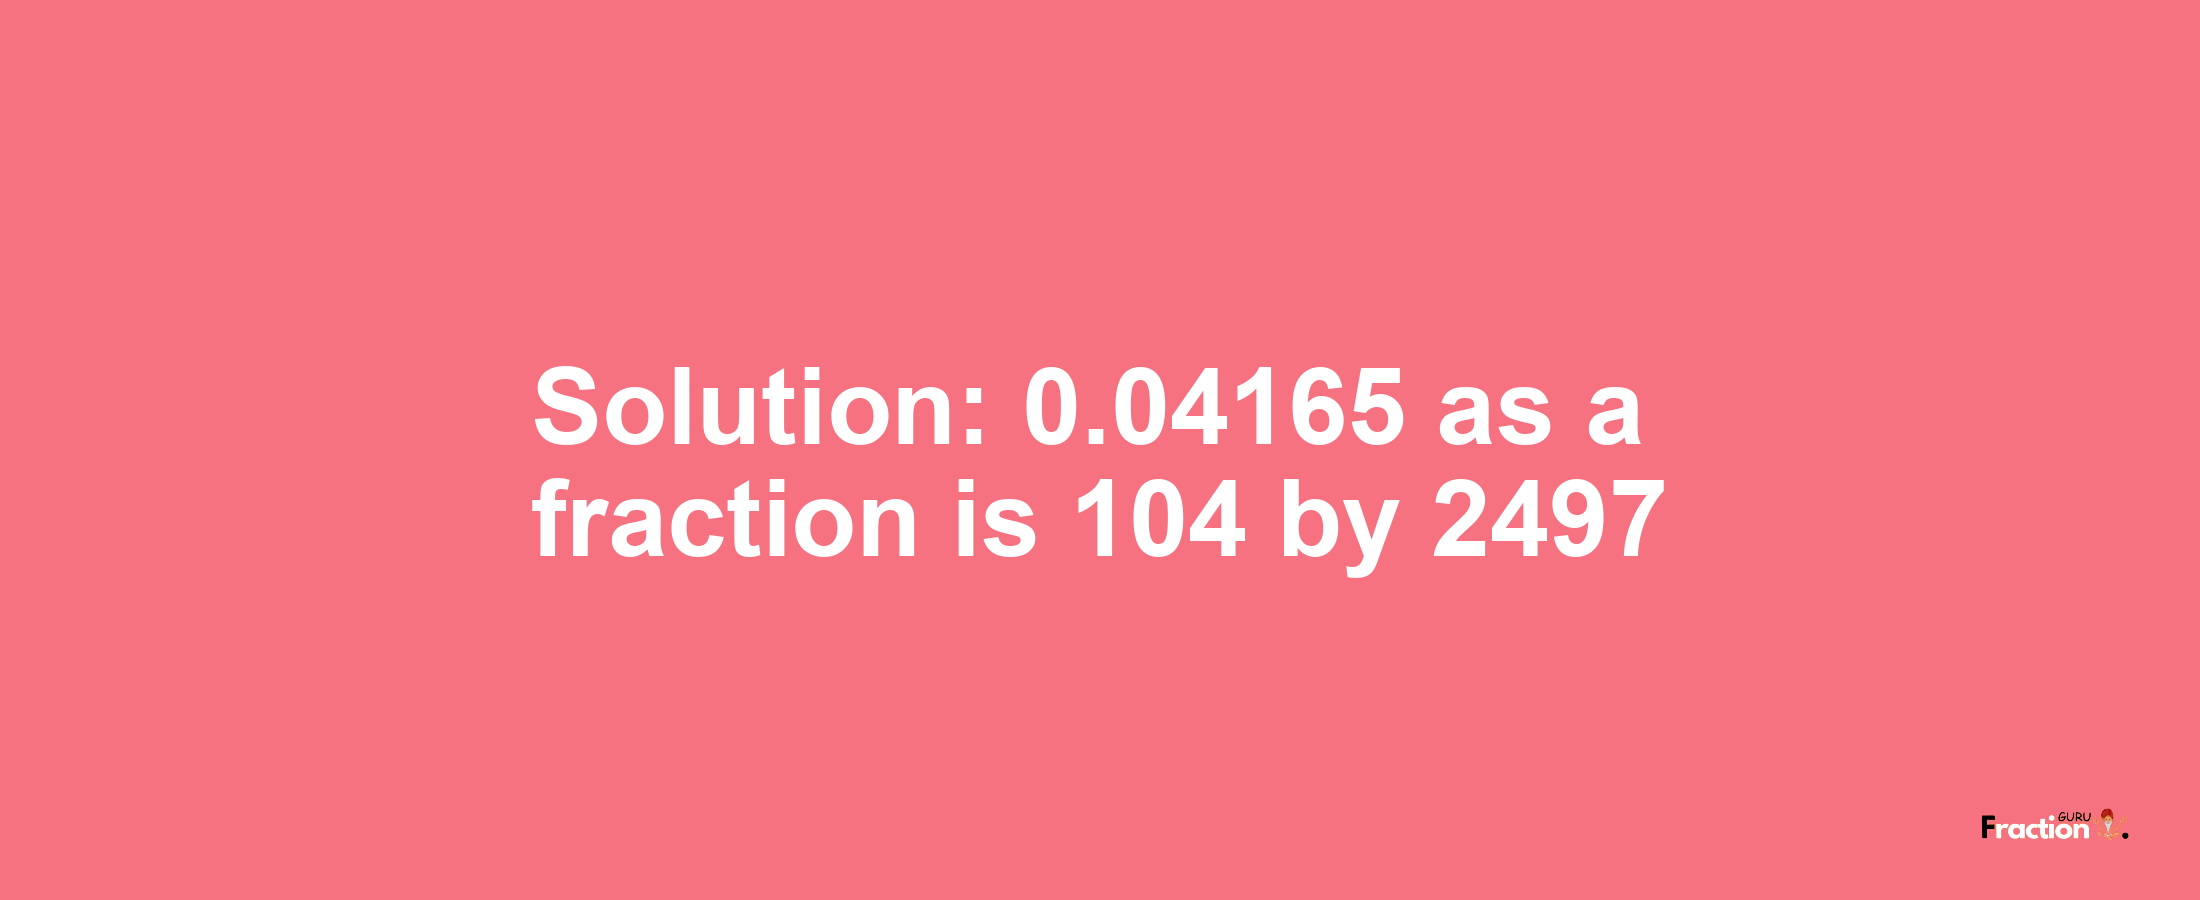 Solution:0.04165 as a fraction is 104/2497